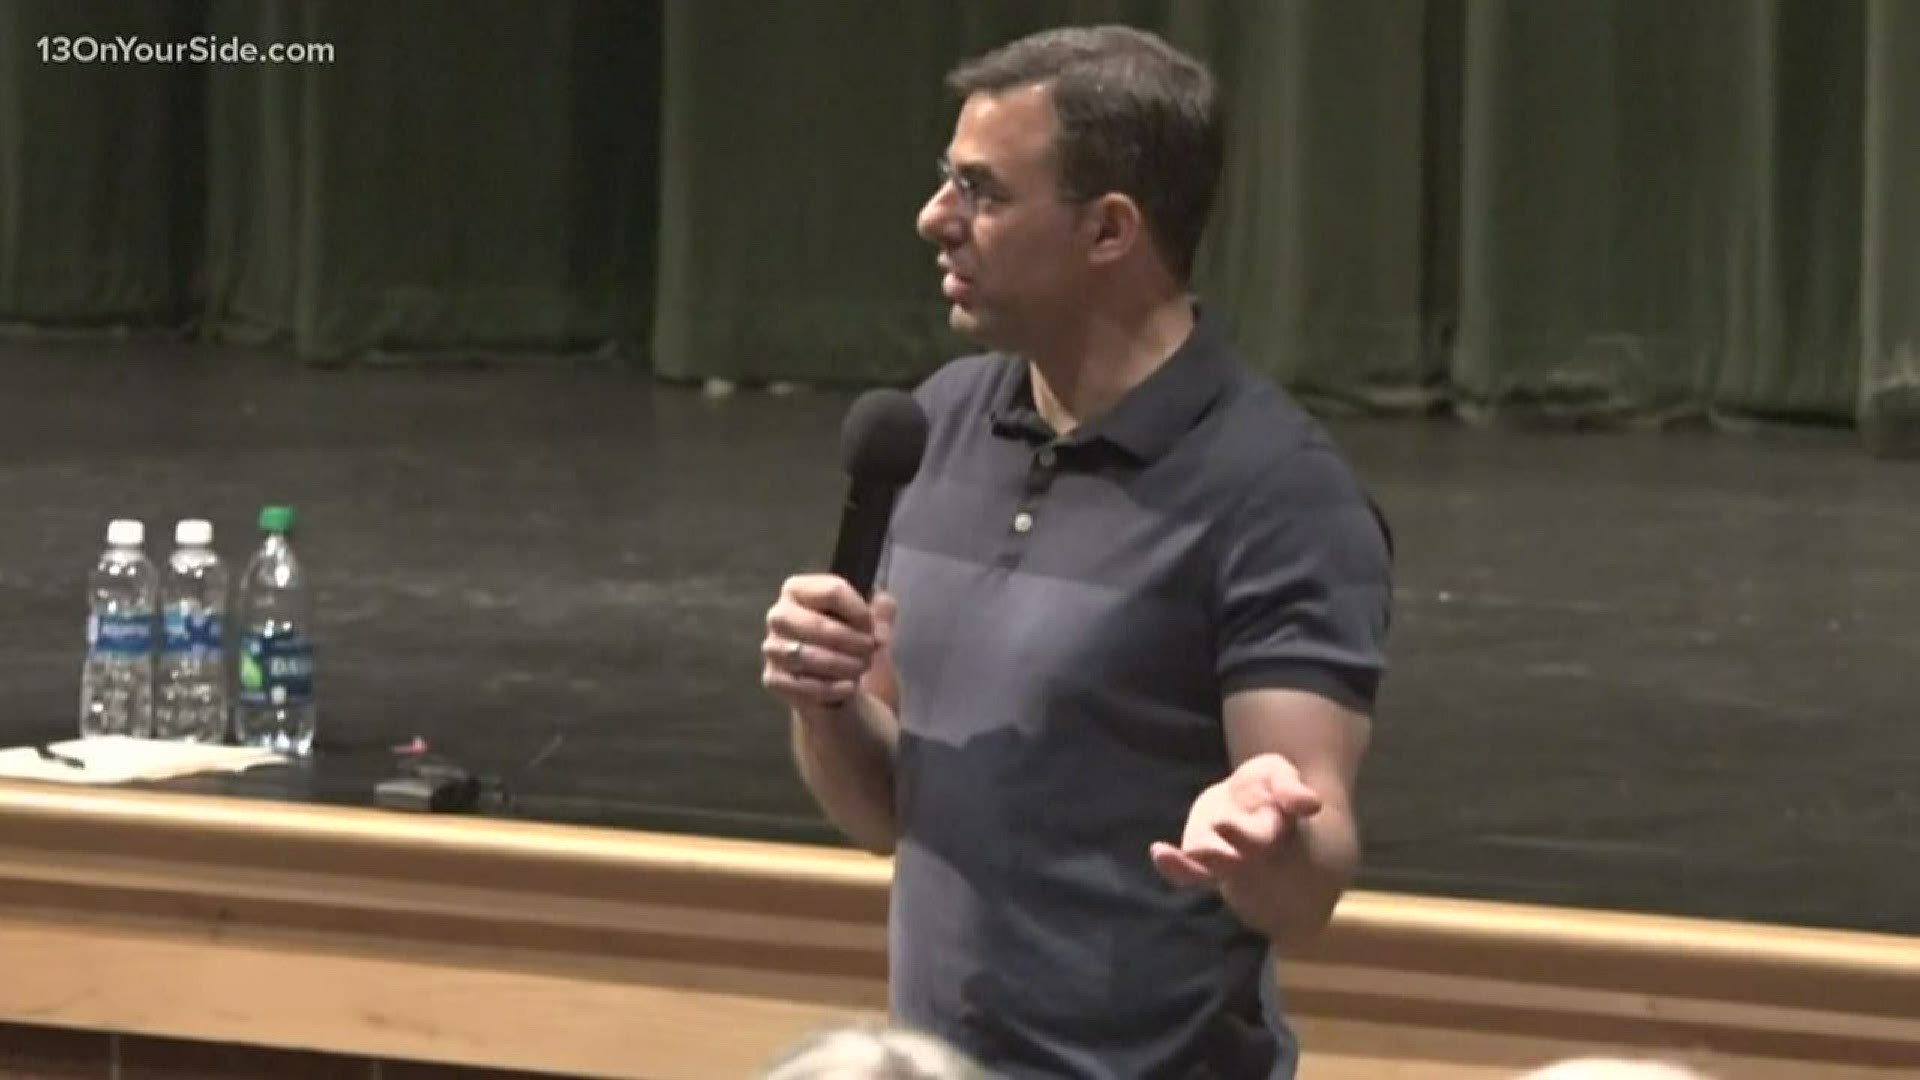 West Michigan Congressman Justin Amash says this election is too important for Donald Trump or Joe Biden to be running for president.